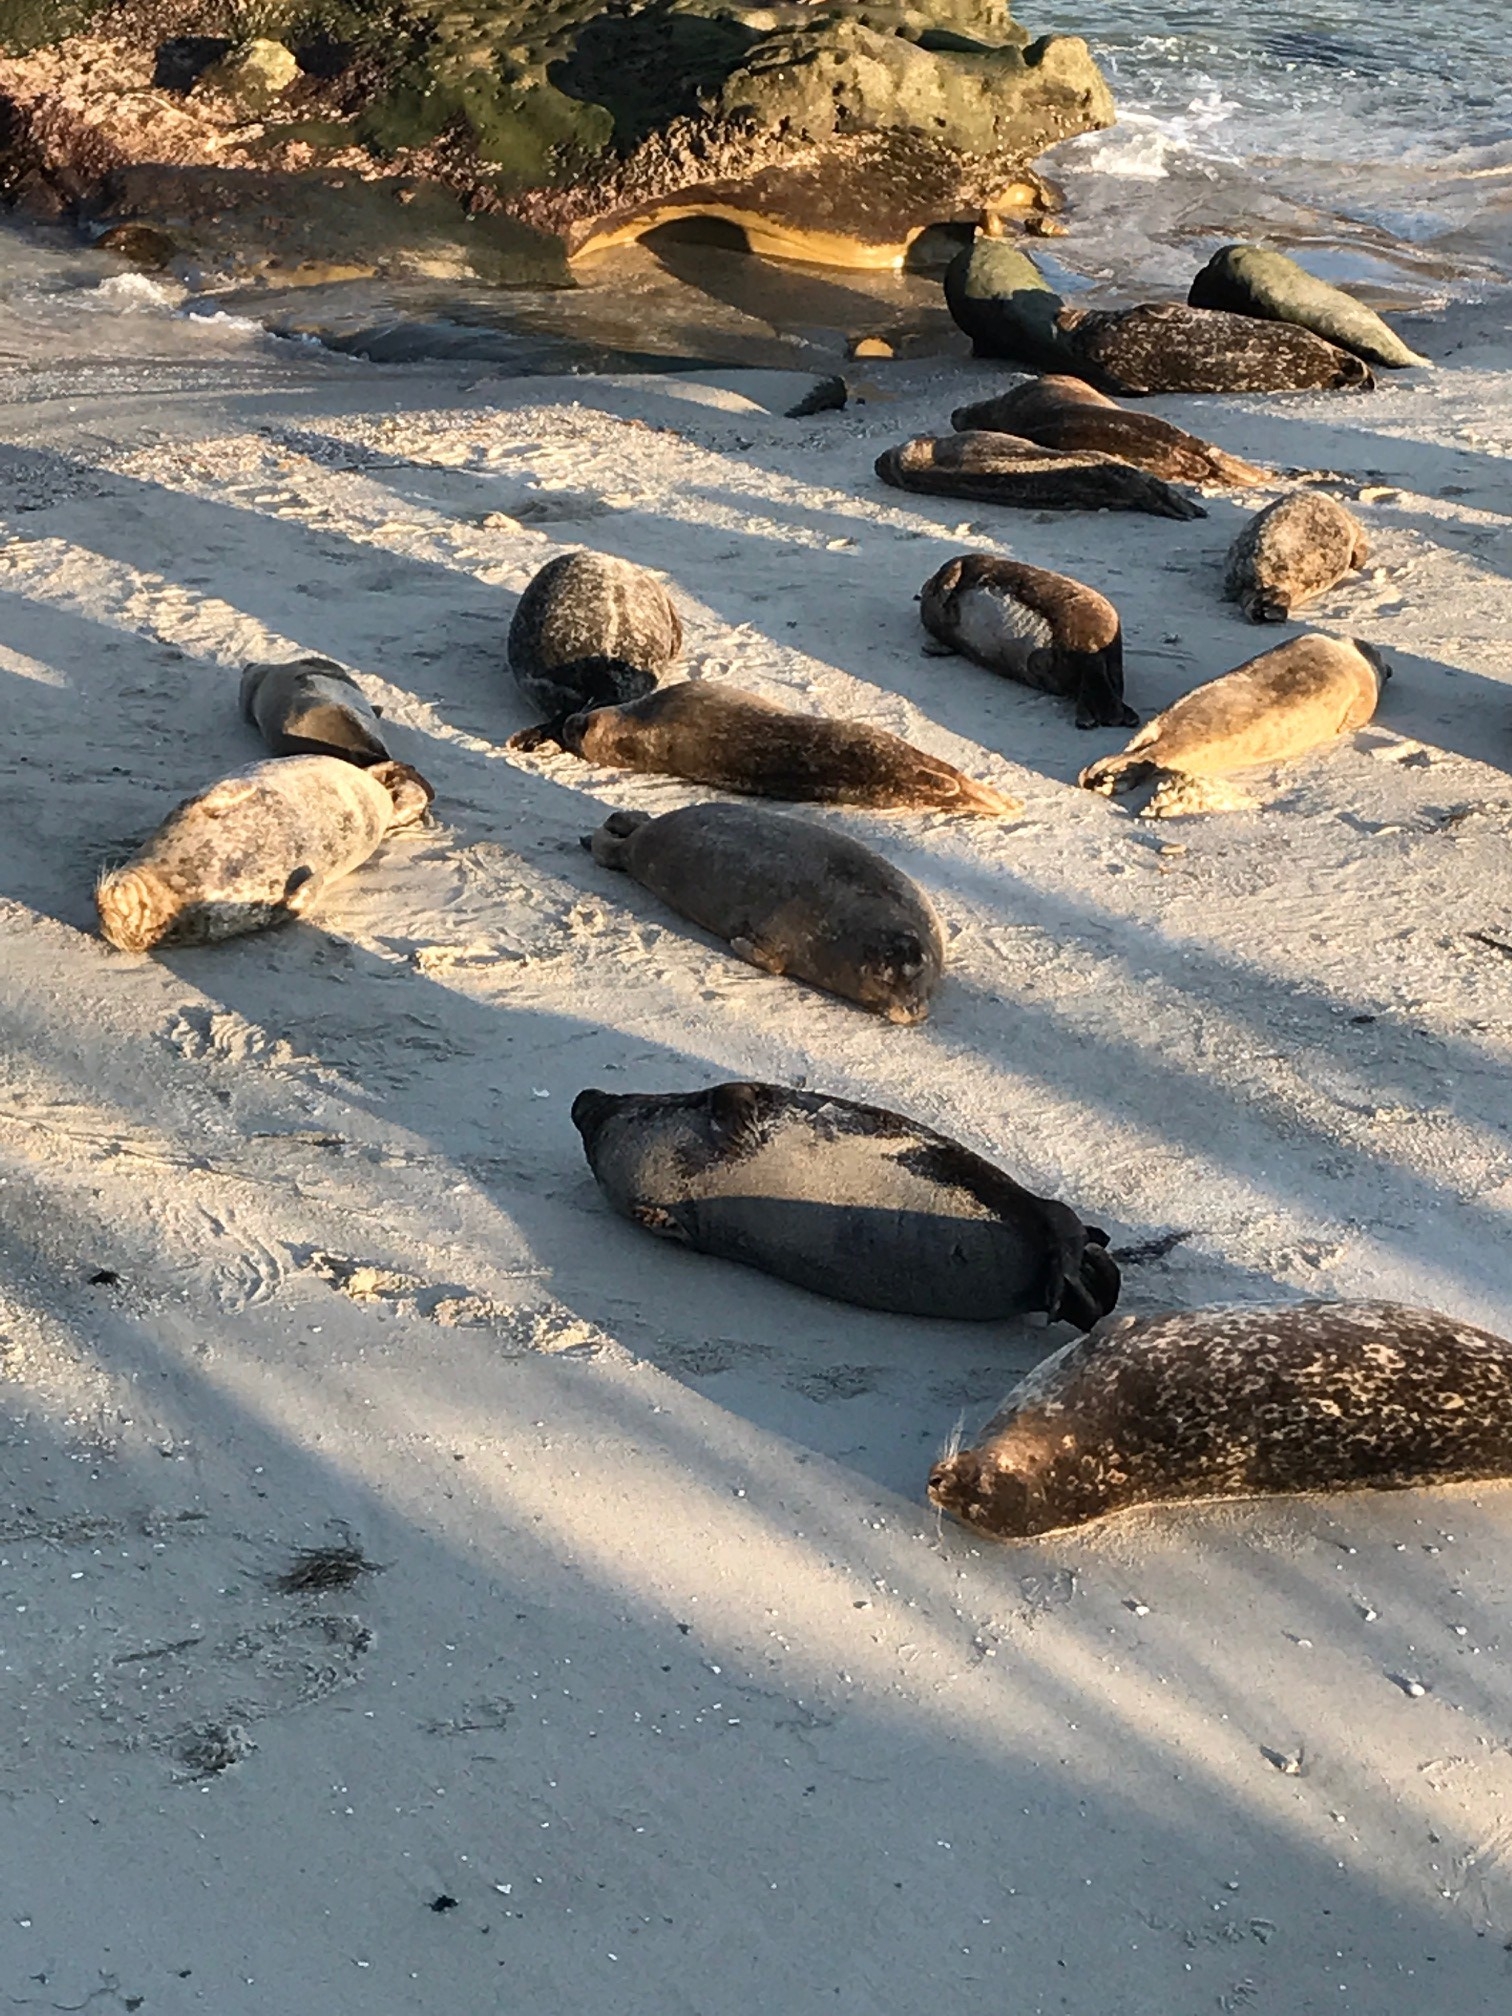 grouping of seals on a beach